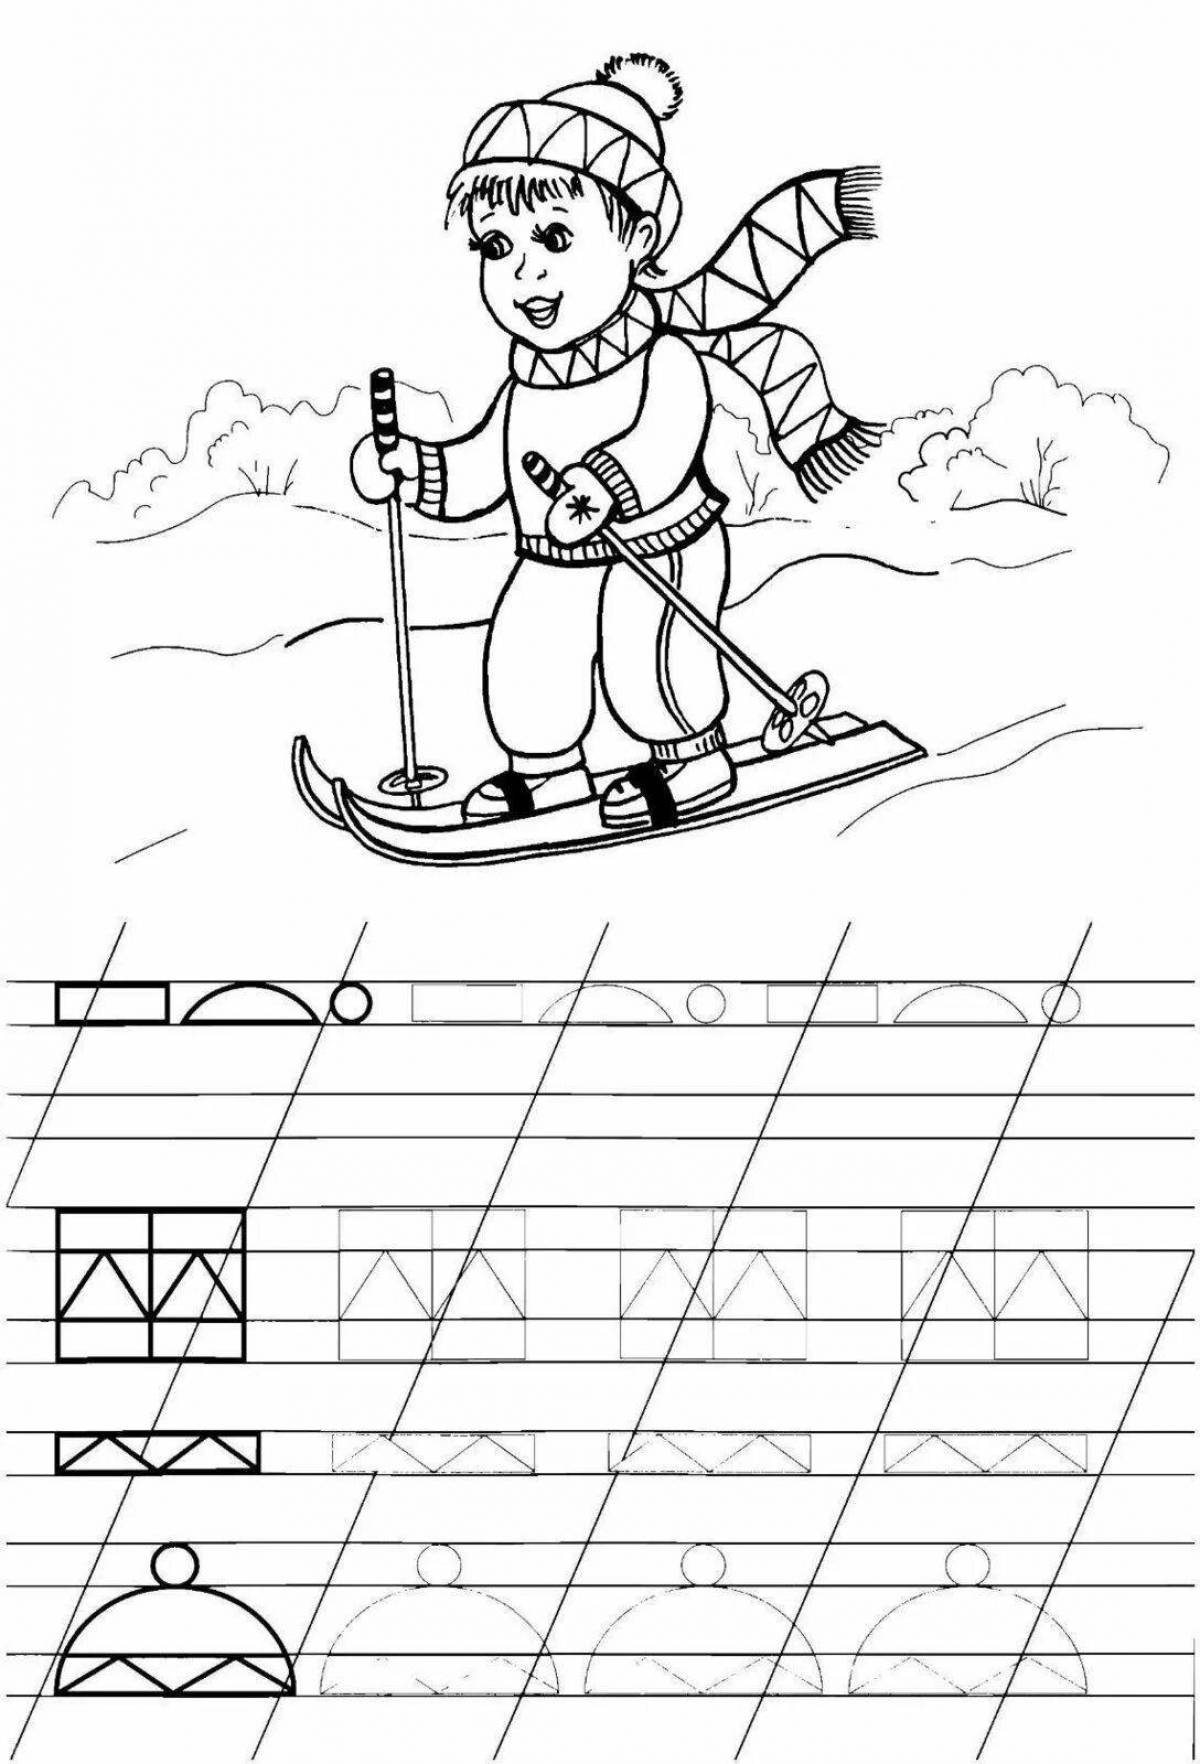 Adventurous skier coloring book for 6-7 year olds